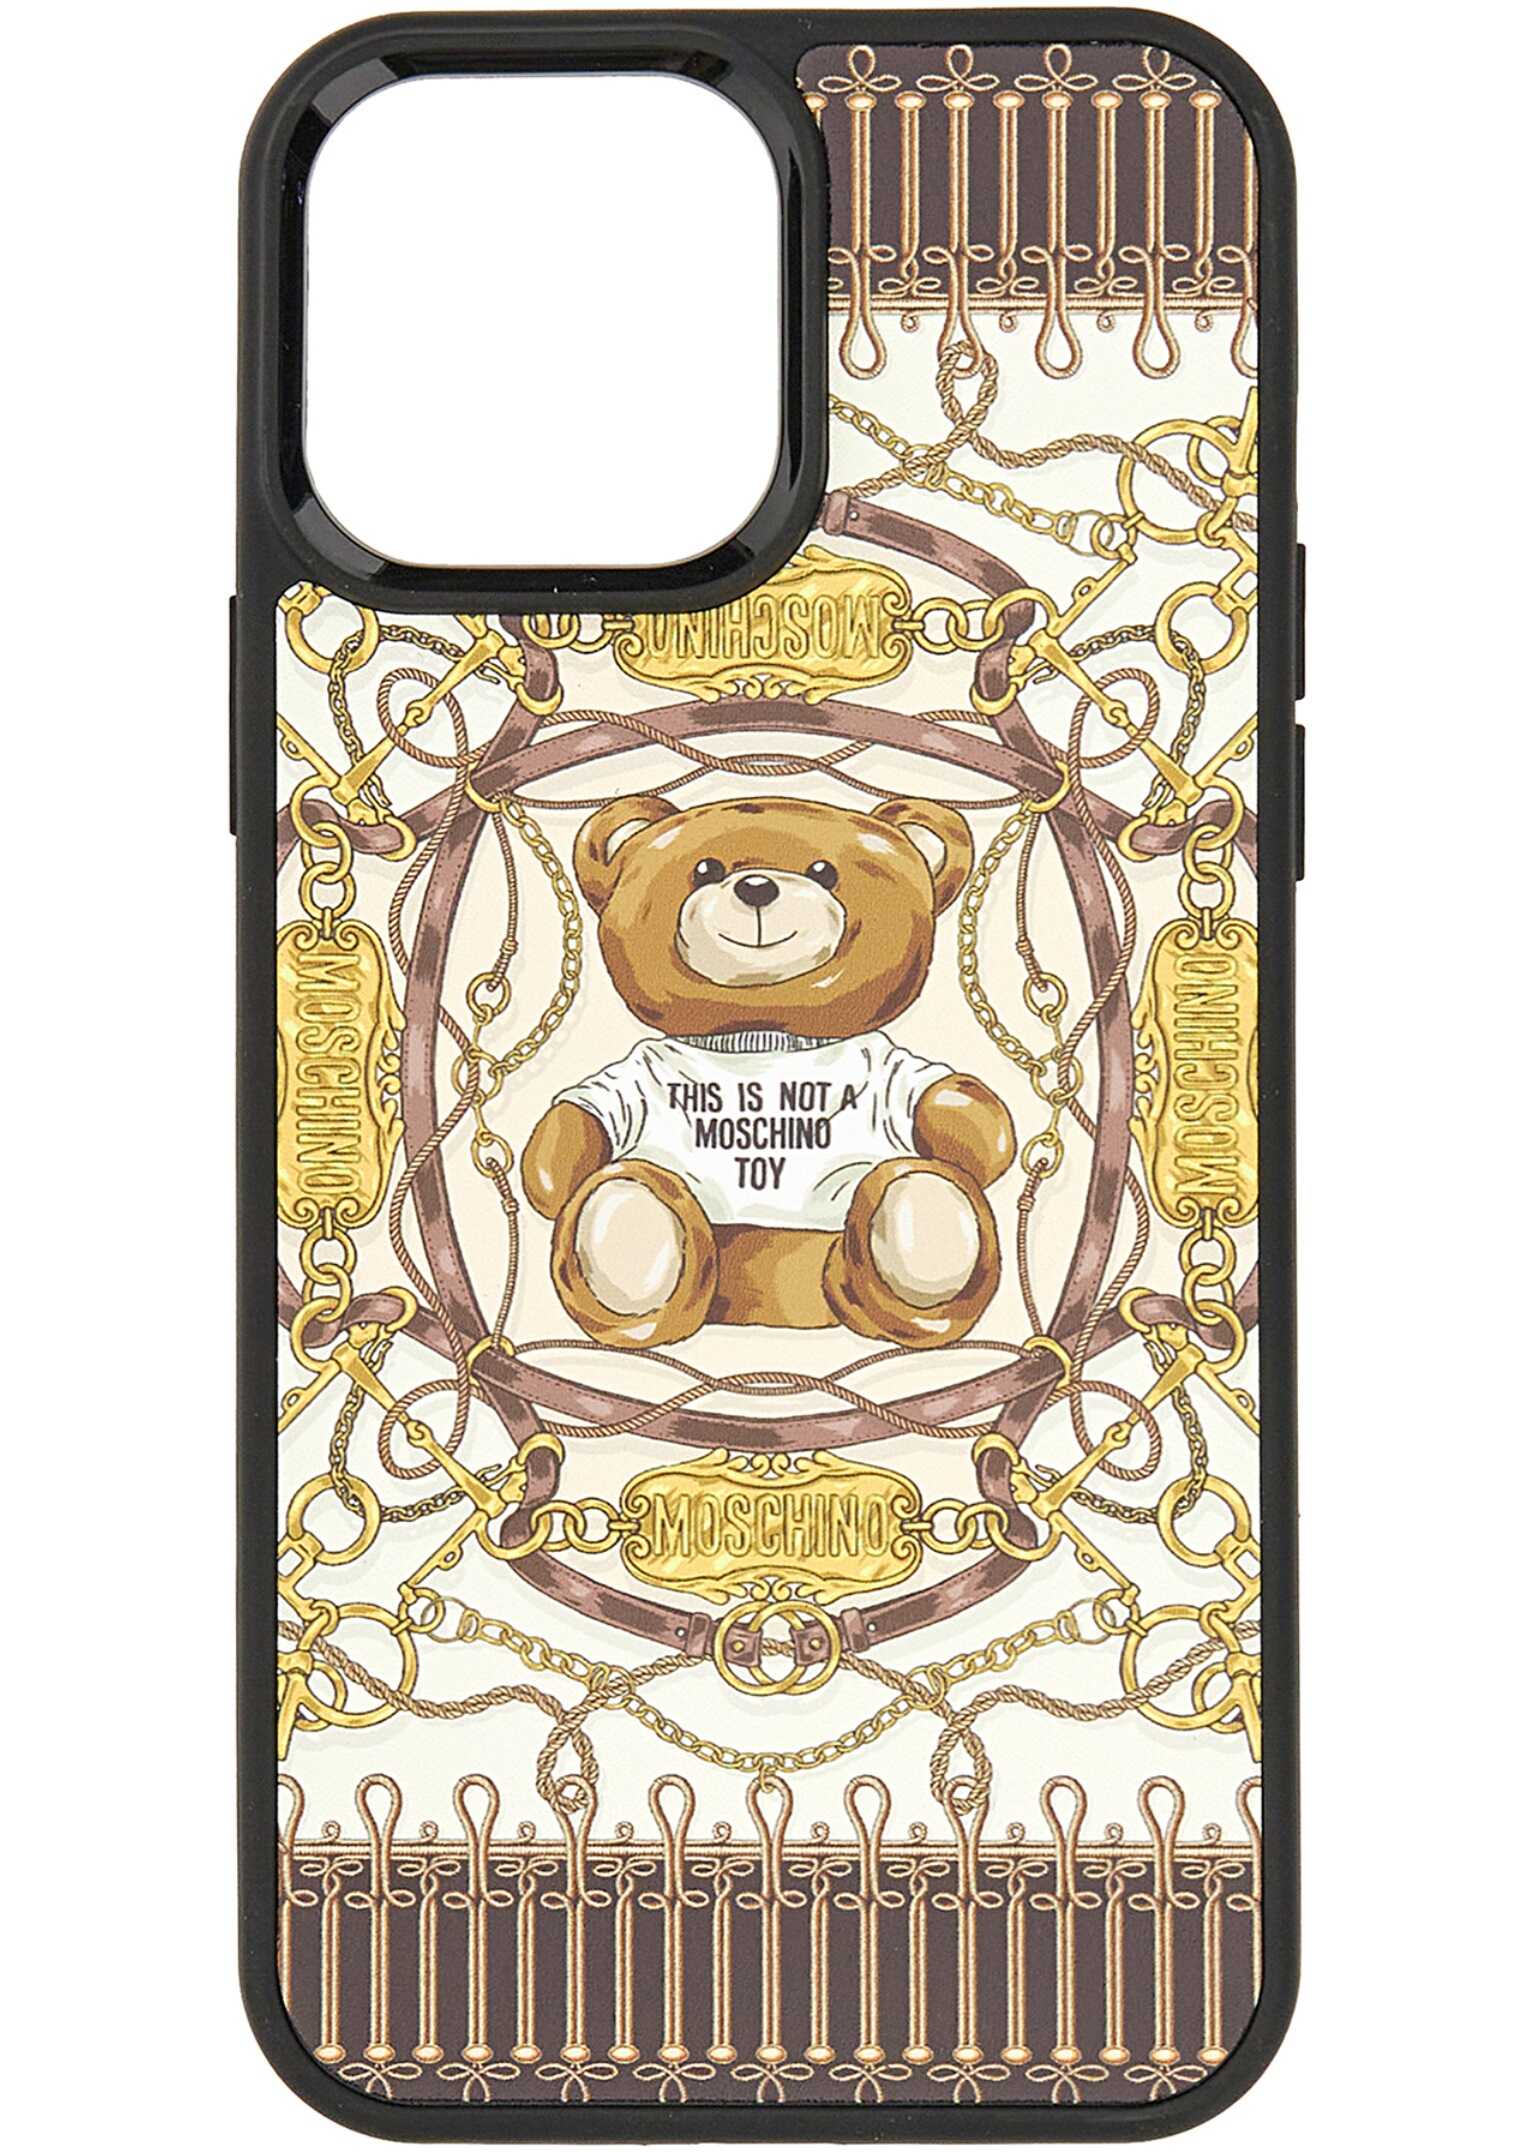 "Teddy Scarf" Iphone Cover